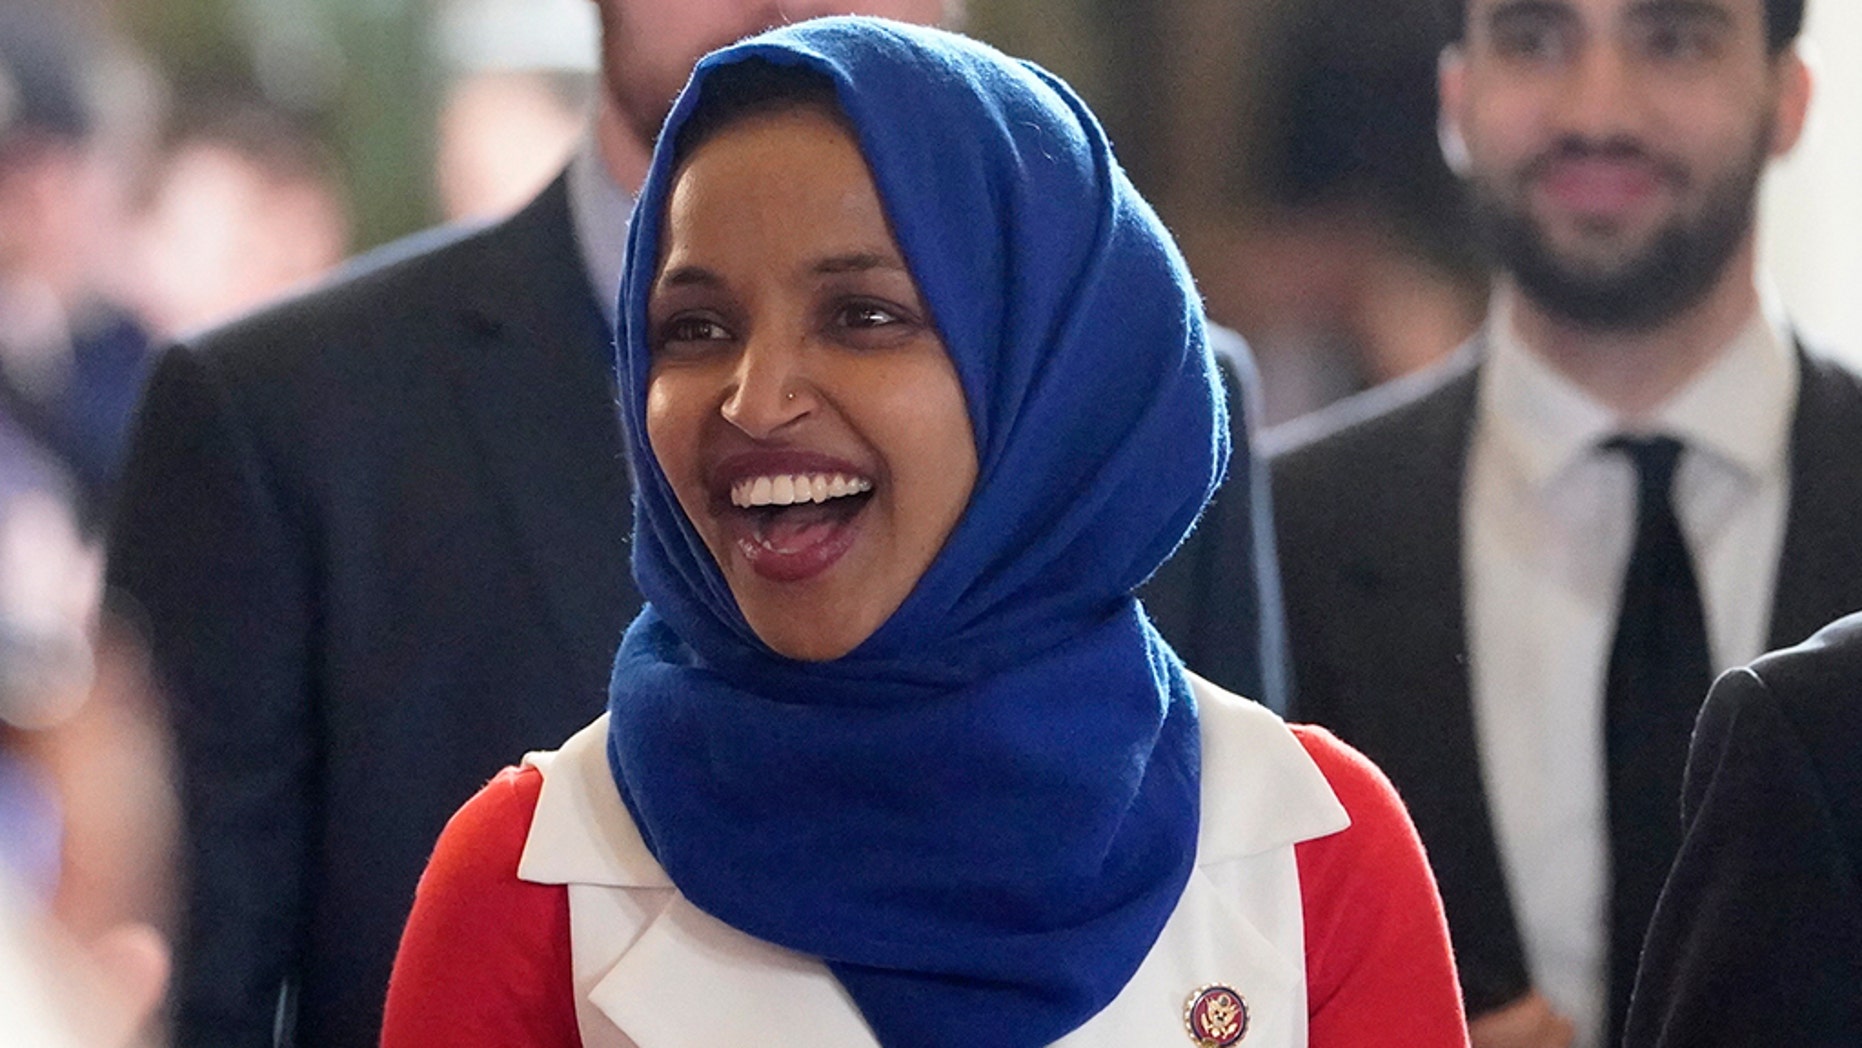 Ilhan Omar's AIPAC tweet sparks condemnation, together ...